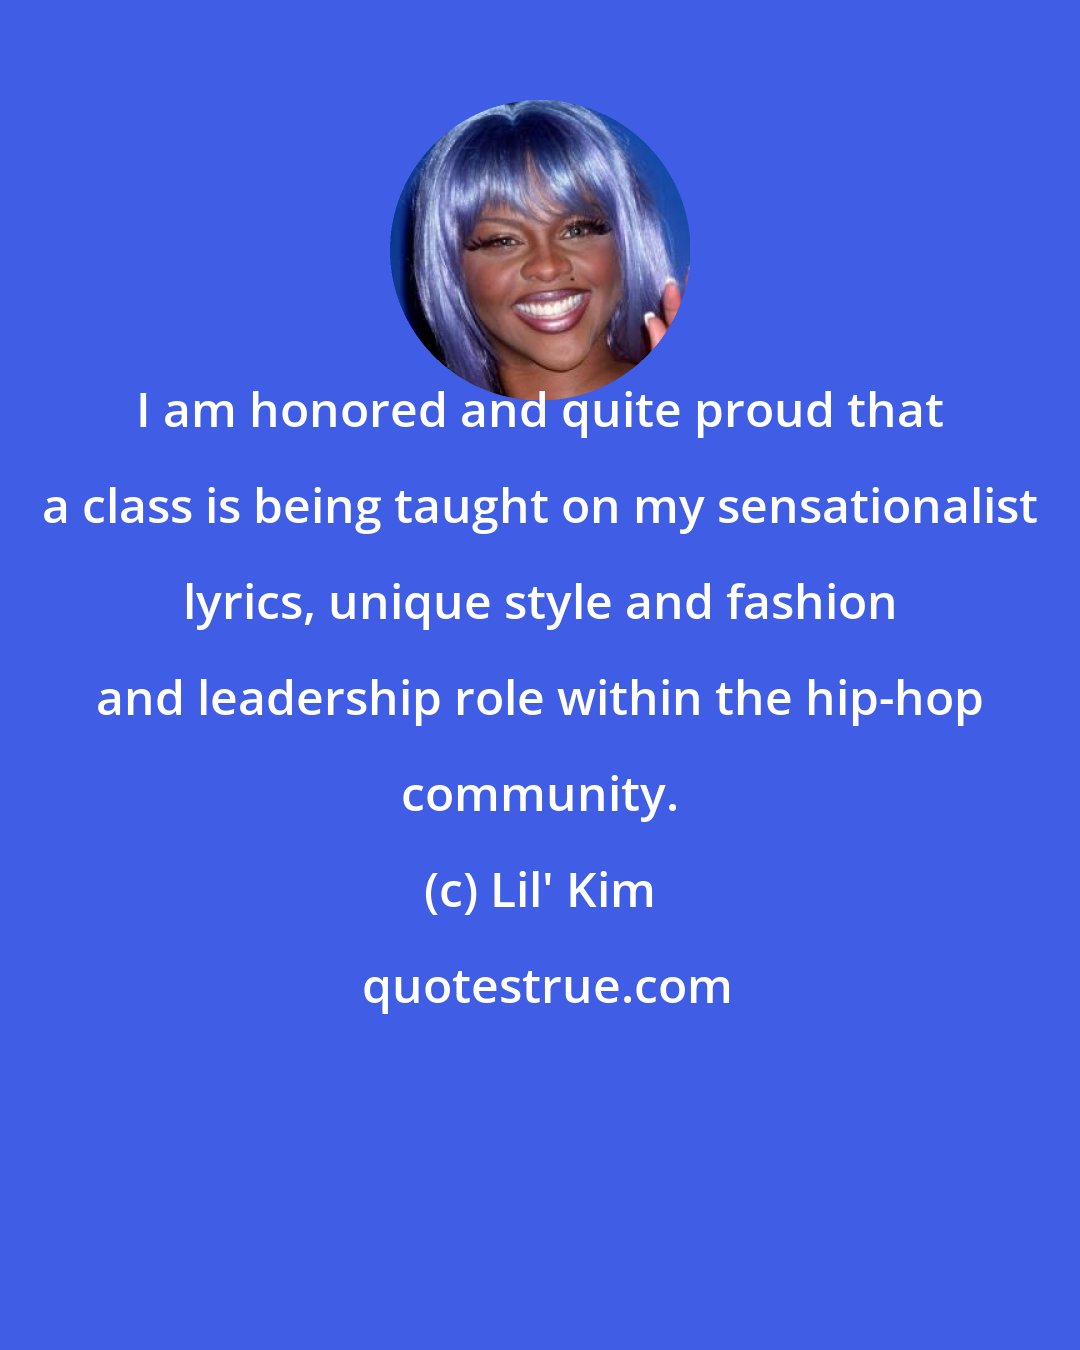 Lil' Kim: I am honored and quite proud that a class is being taught on my sensationalist lyrics, unique style and fashion and leadership role within the hip-hop community.